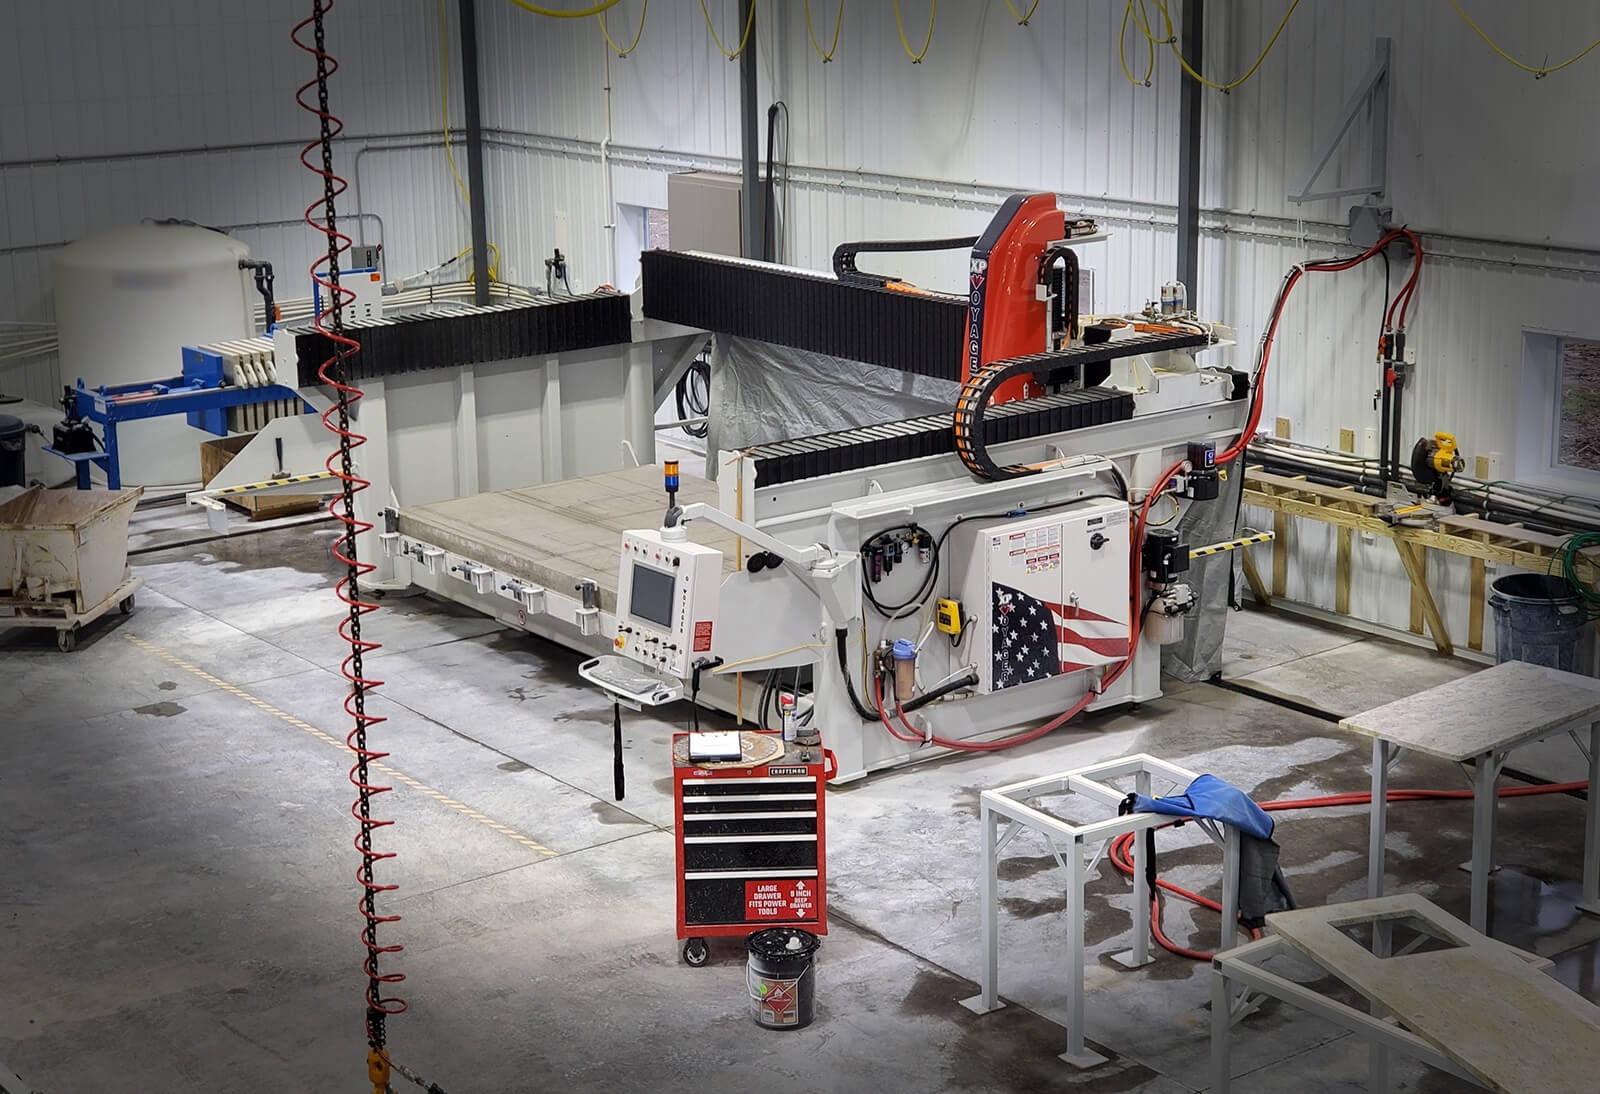 VOYAGER XP 5-Axis CNC Stone Saw at Whispering Pines